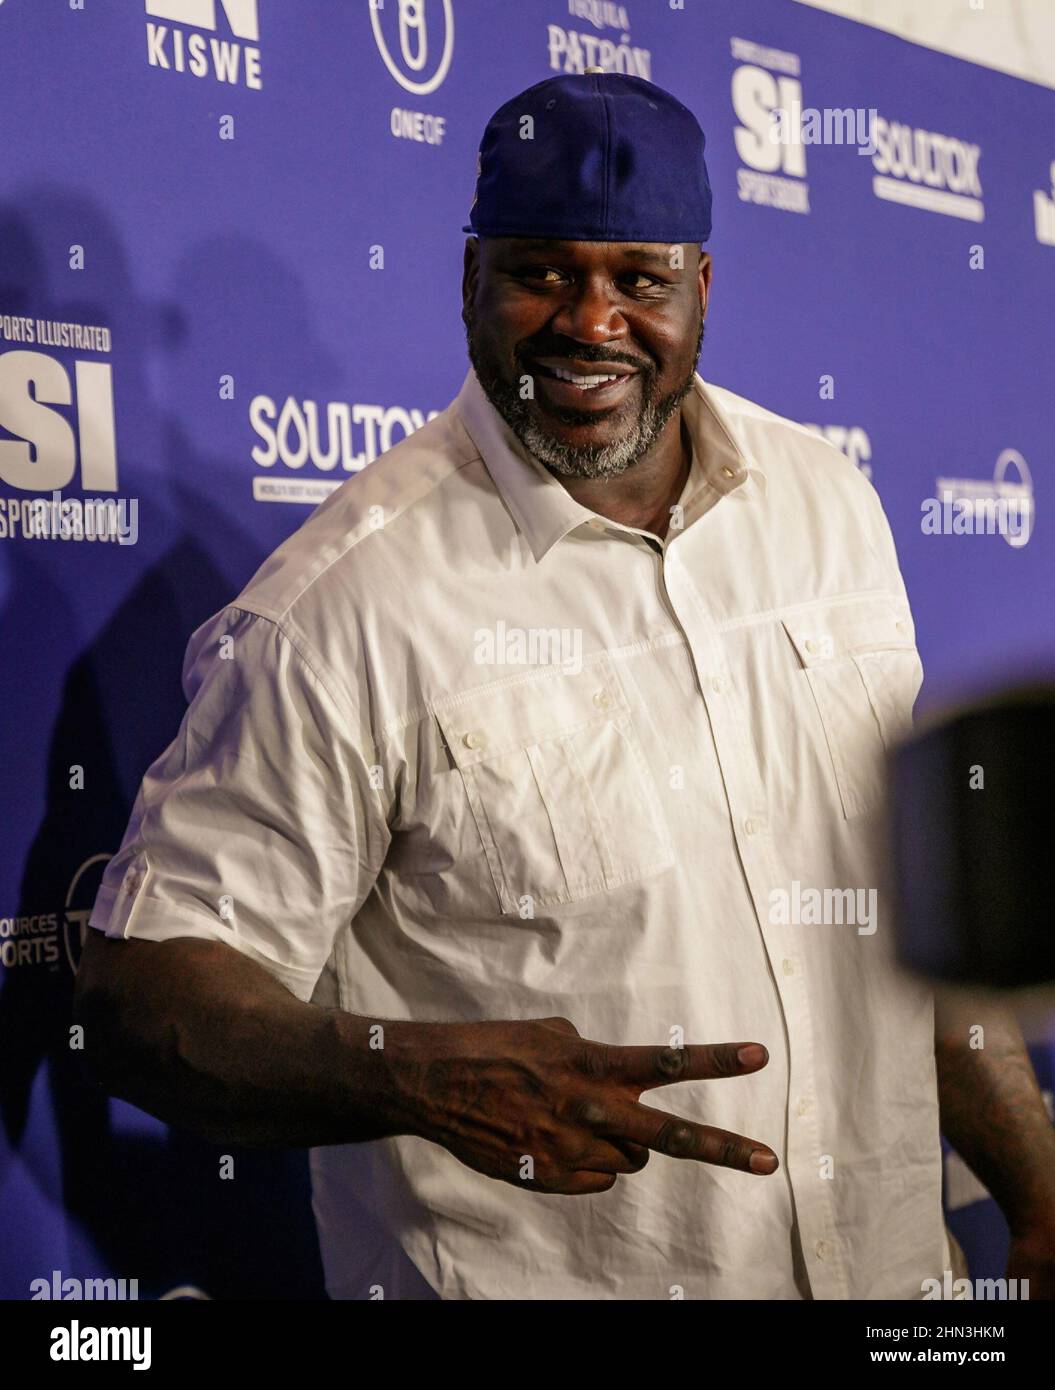 Shaquille O'Neal nimmt an der Sports Illustrated Super Bowl Party im Century City Park am 12. Februar 2022 in Los Angeles, Kalifornien, Teil. Foto: Shea Flynn/imageSPACE/MediaPunch Stockfoto